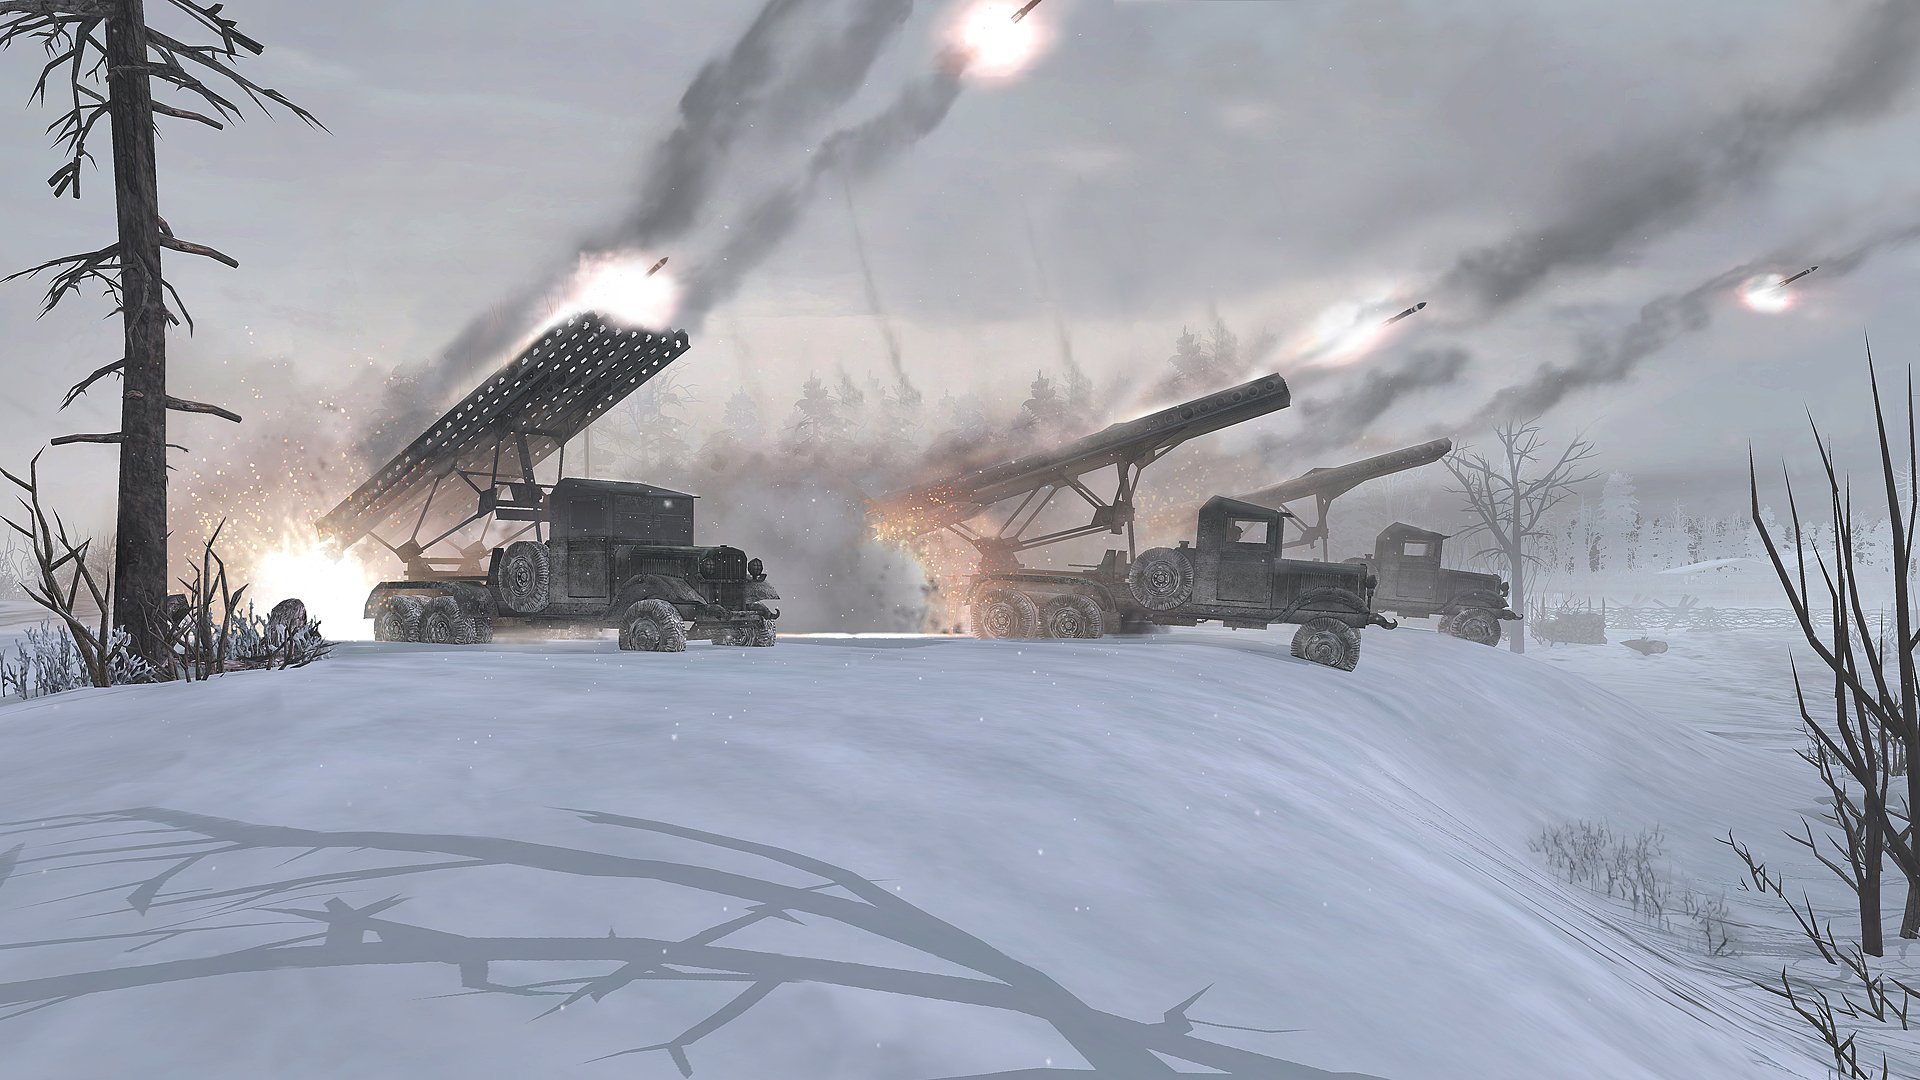 company of heroes 2 map with church in the middle